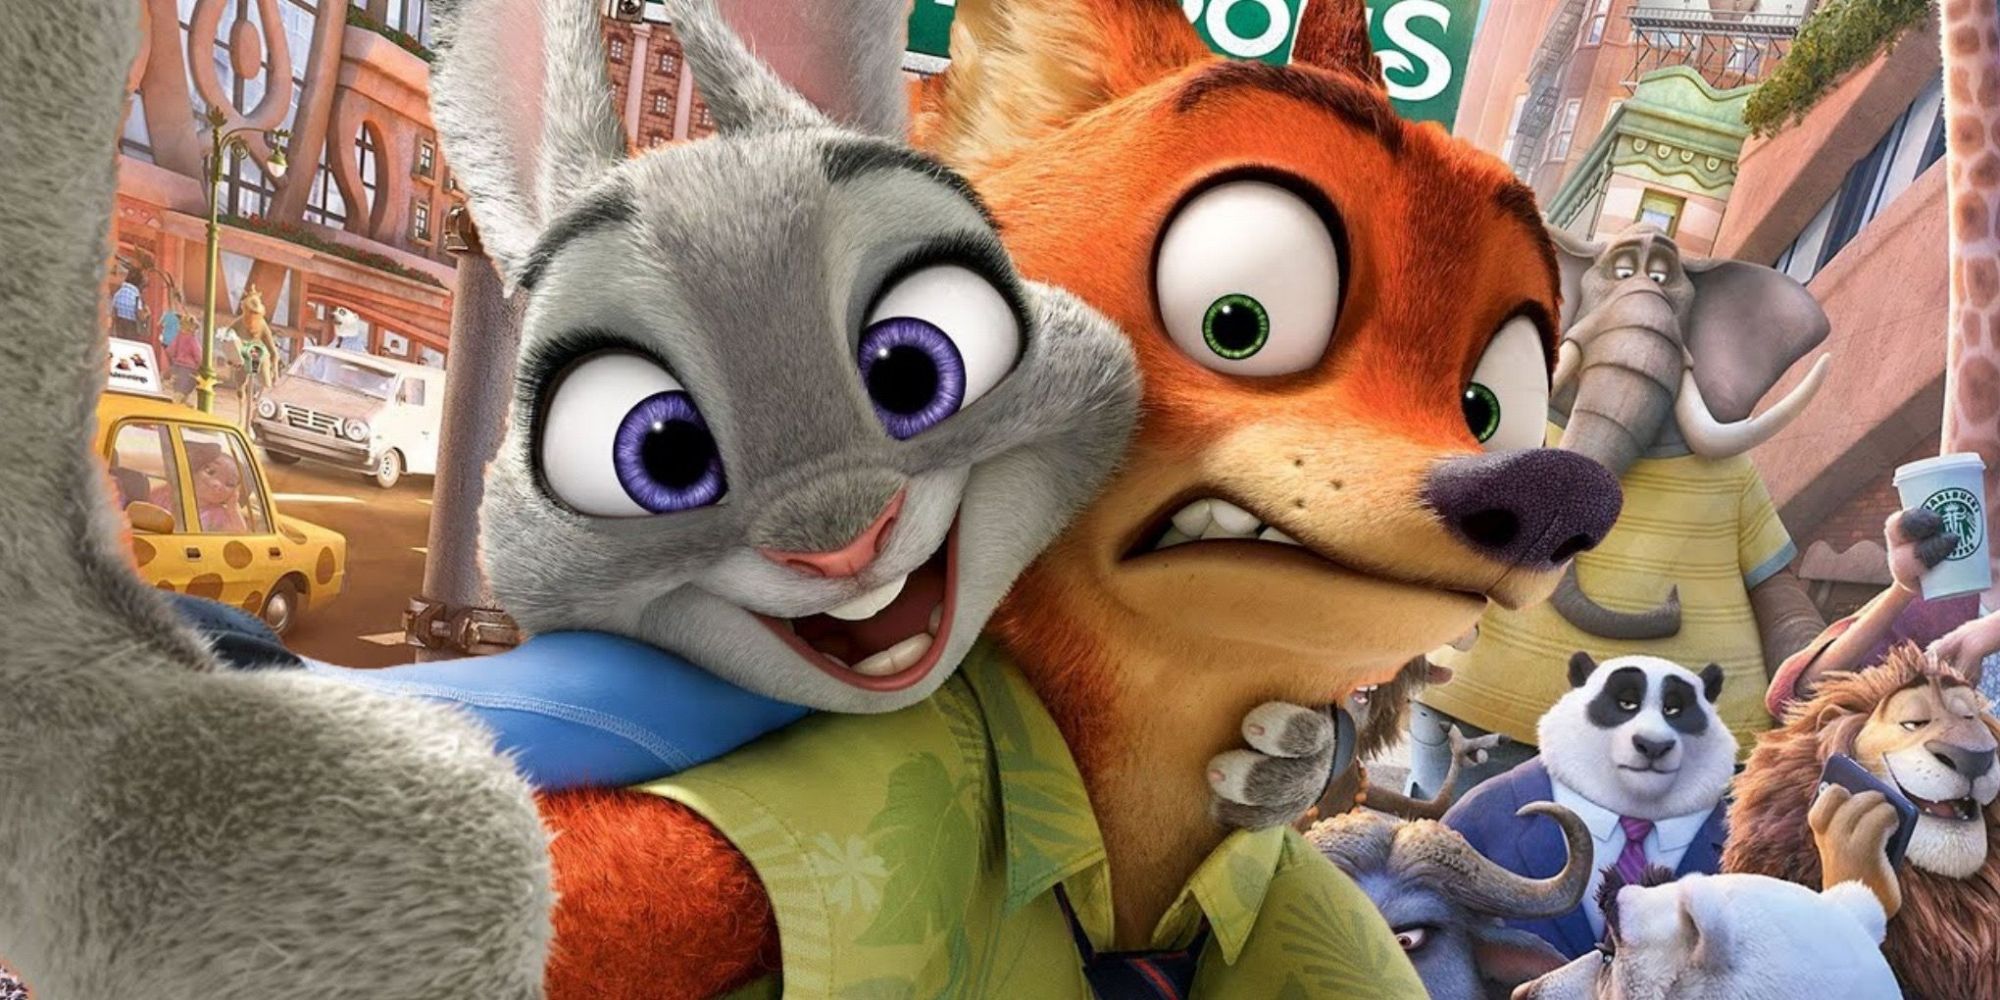 Judy and Nick are taking a selfie in Zootopia.